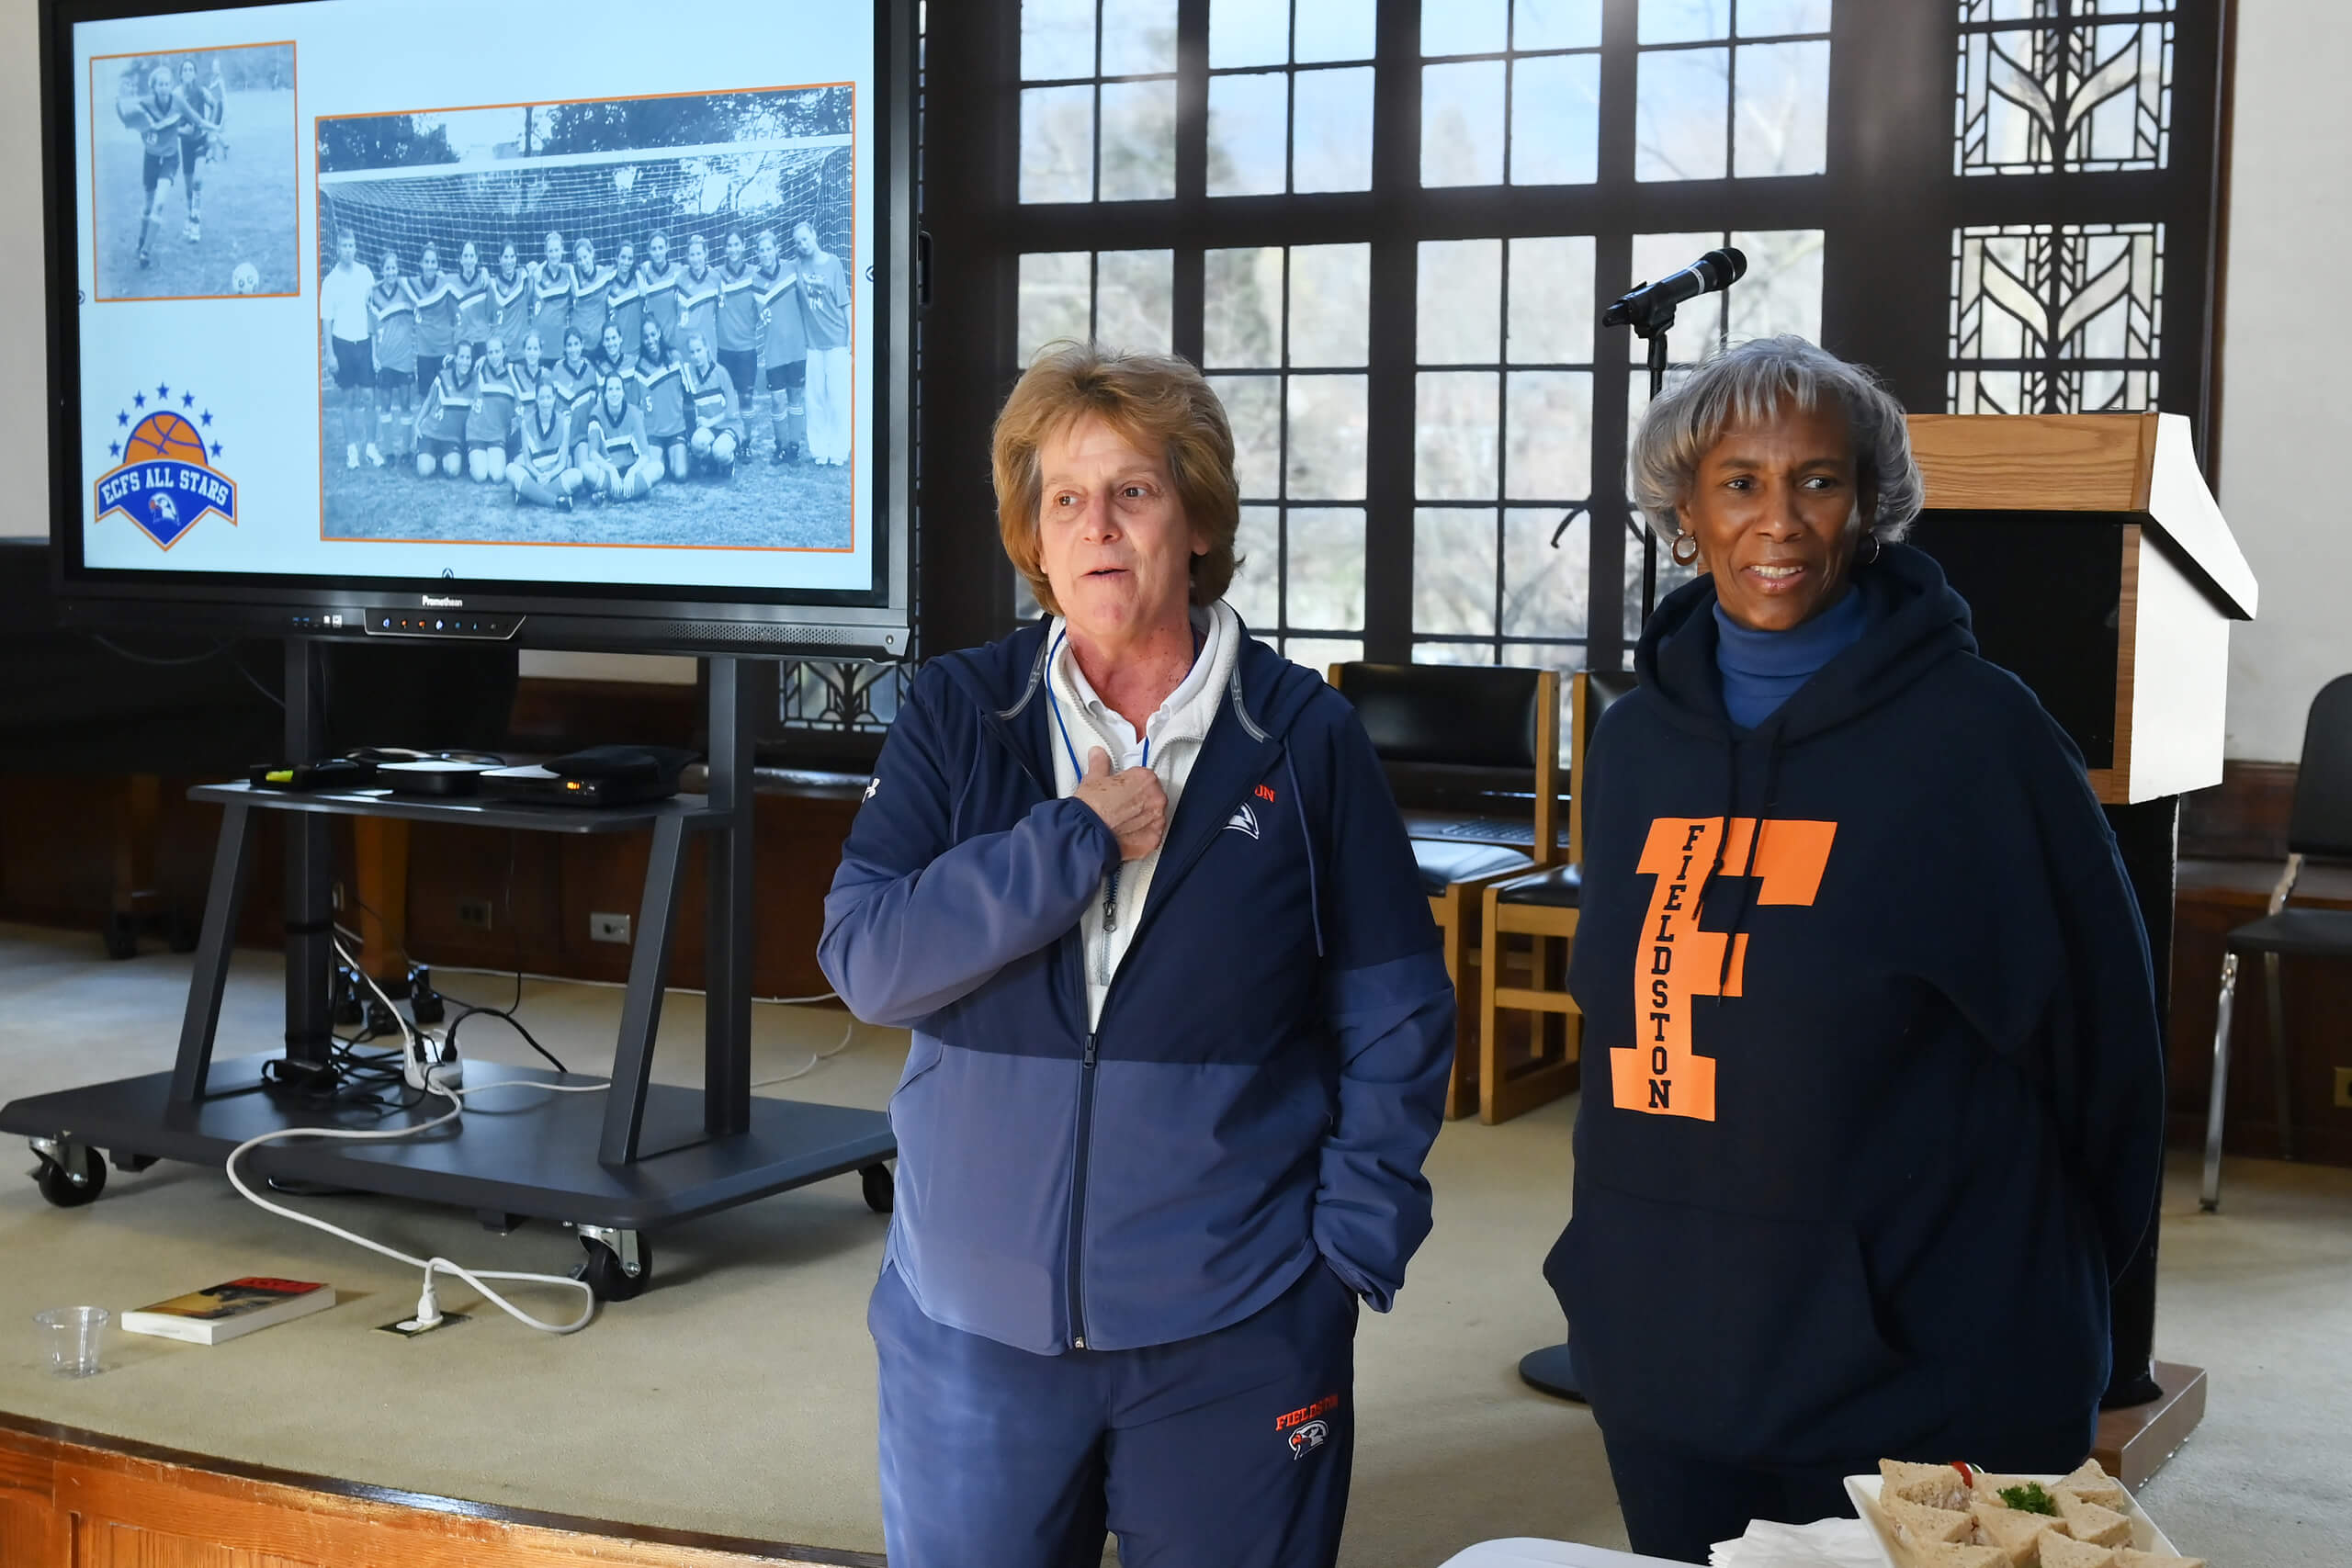 Teachers and coaches Diane Toth and Janet Pugh speak about their experience playing sports at Fieldston at Title IX reception.